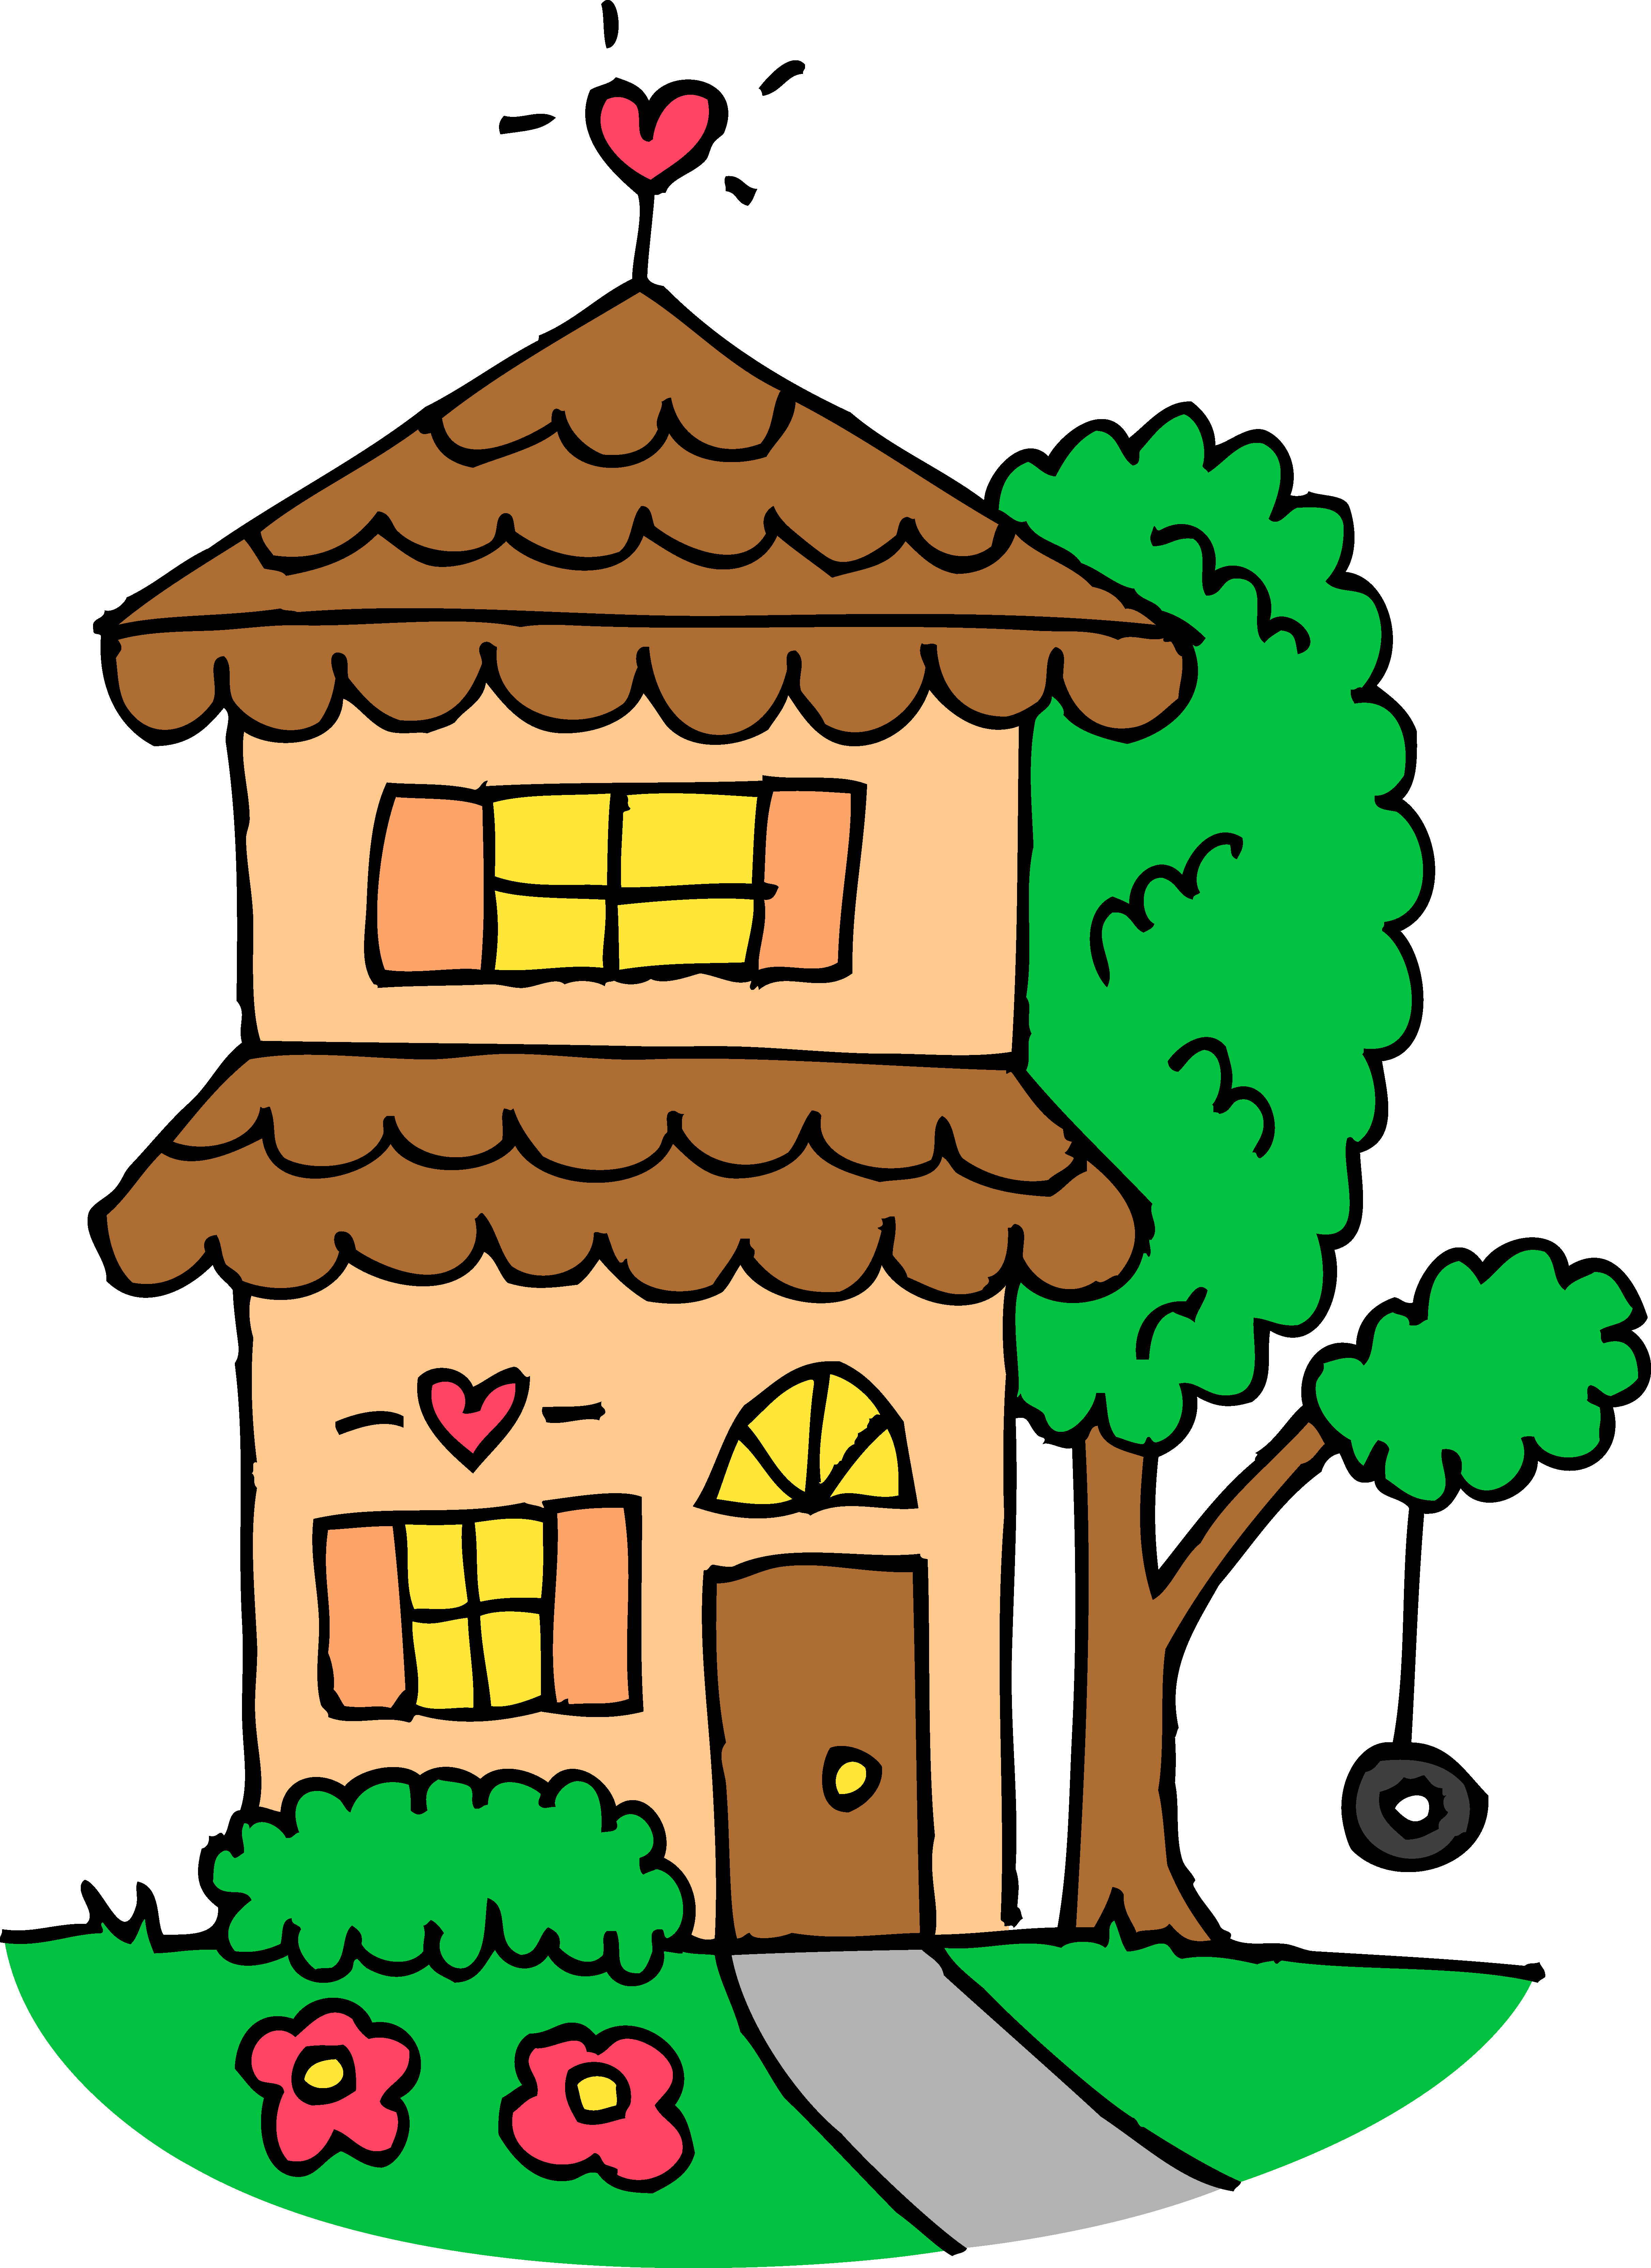 Sold House Clip Art | Clipart Panda - Free Clipart Images